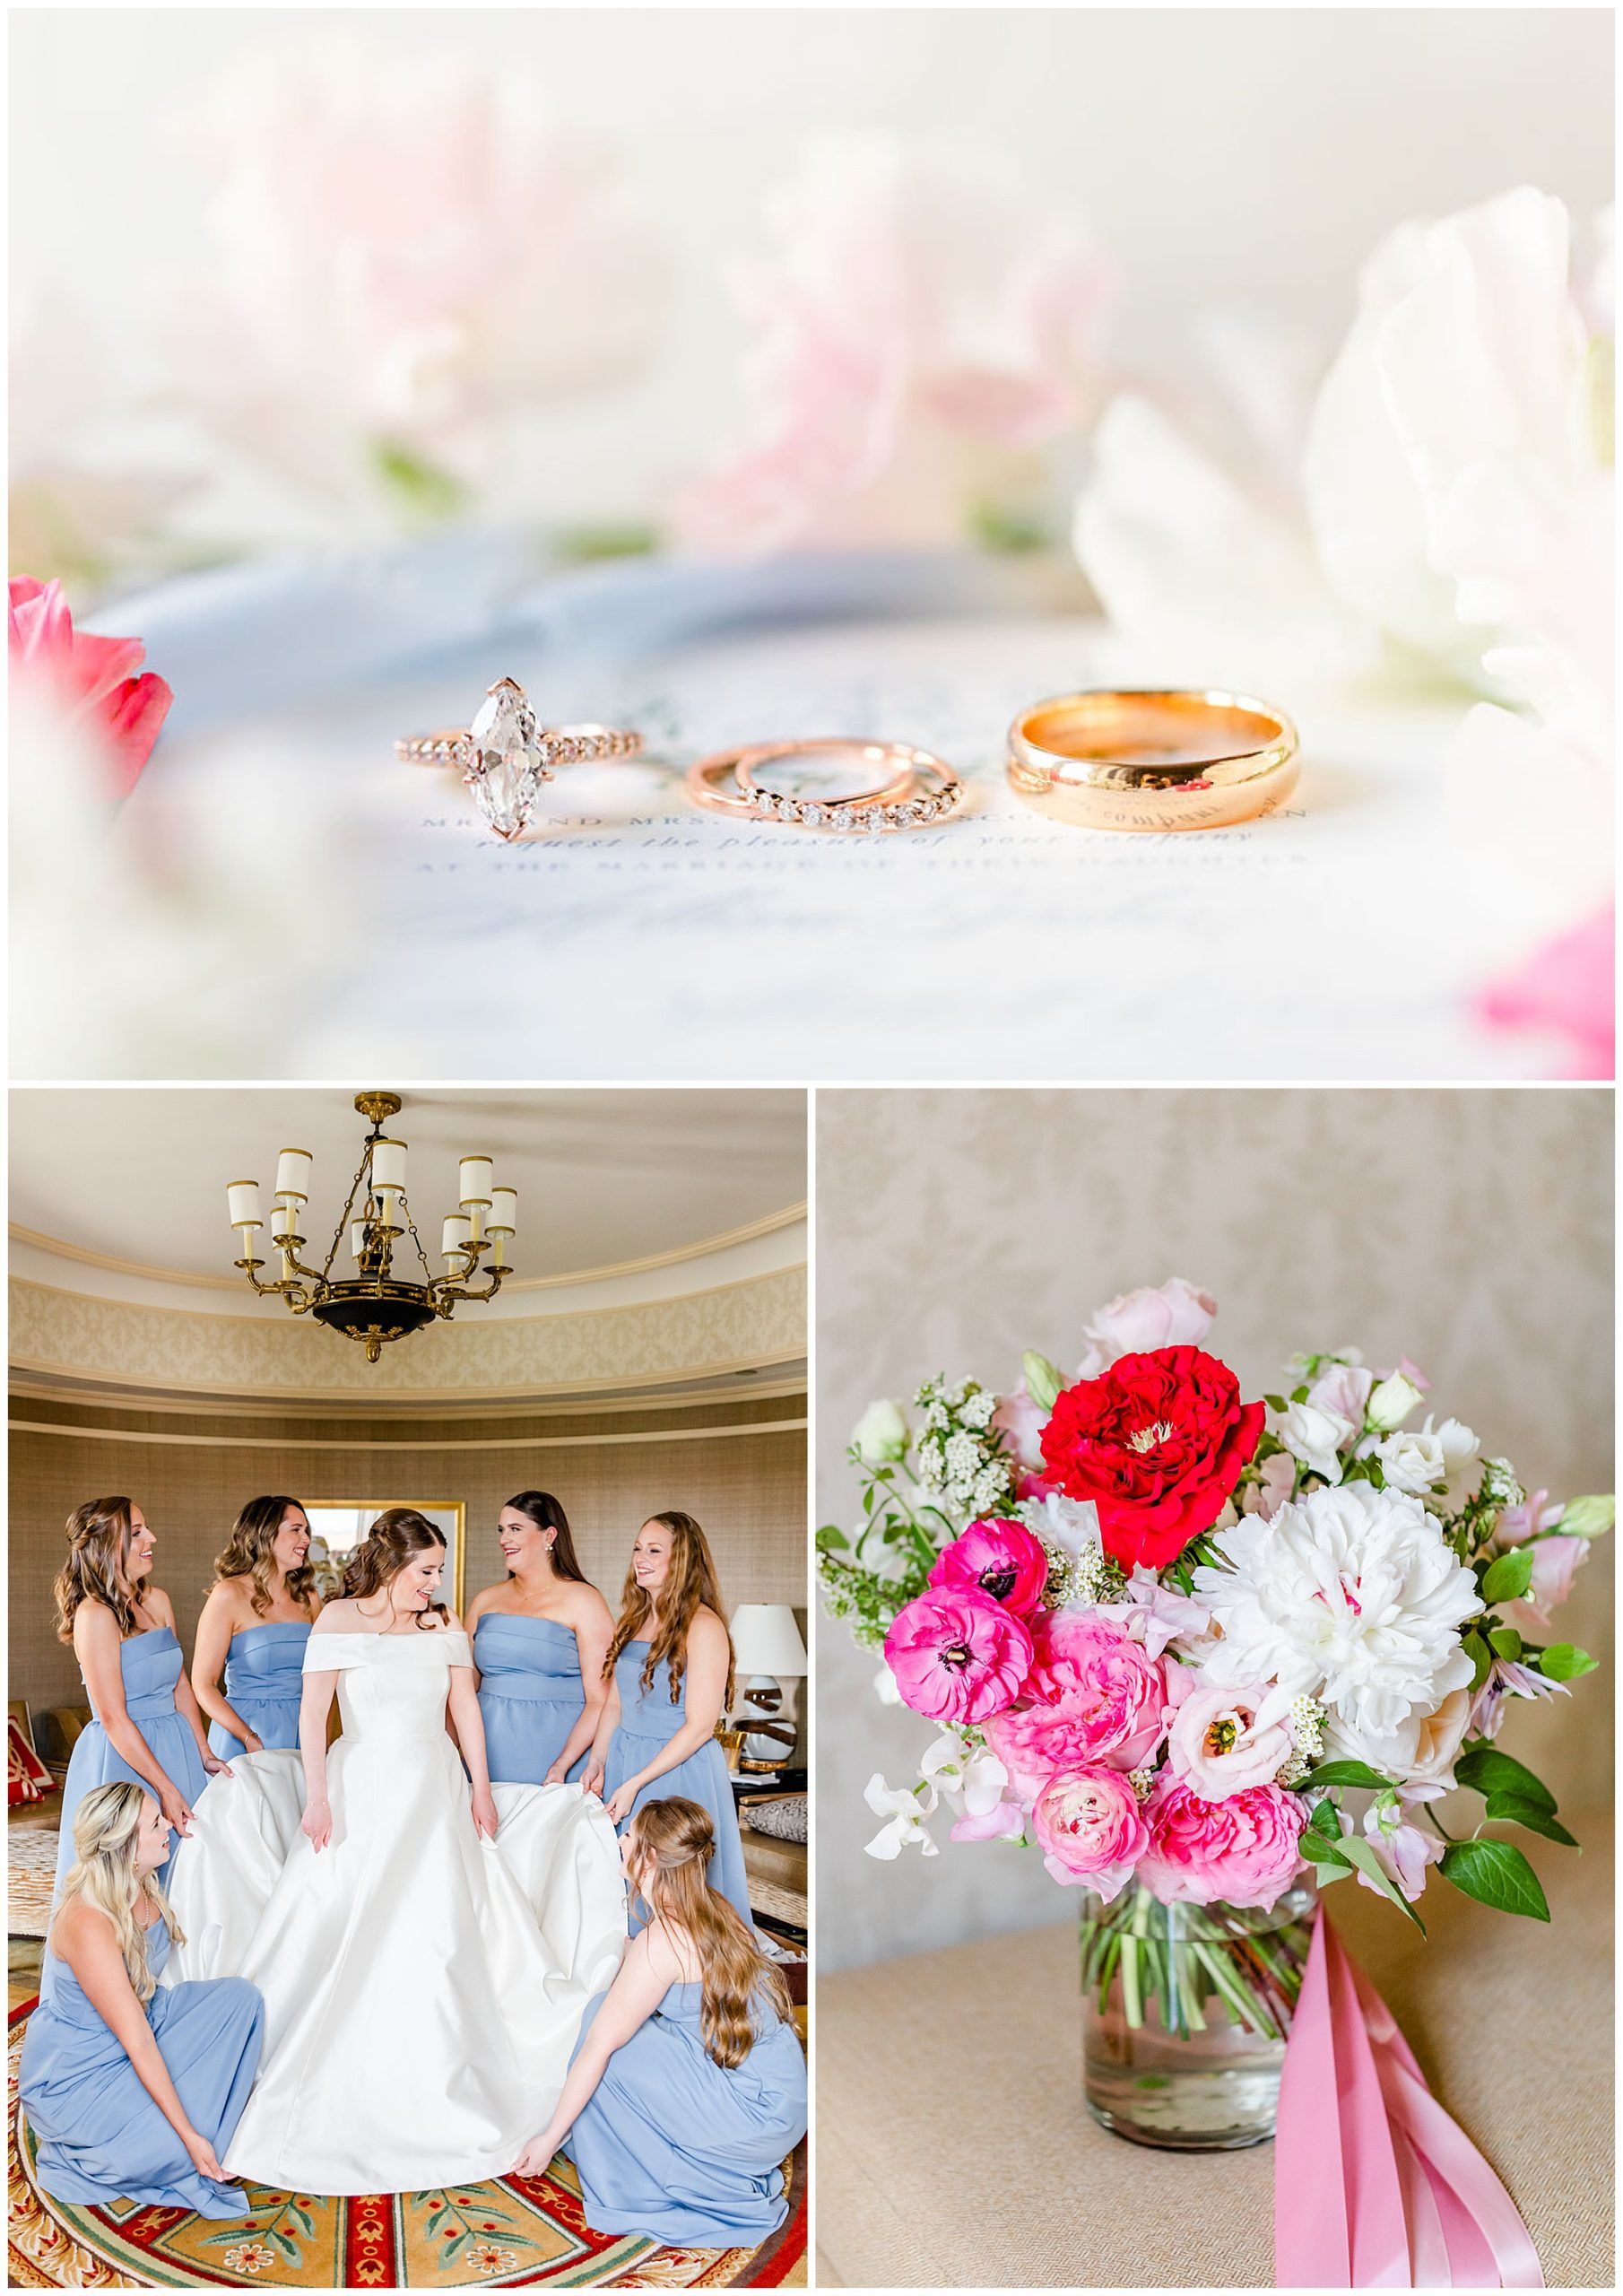 elegant French blue Willard Intercontinental wedding, DC wedding, elegent DC wedding, luxury DC wedding venue, high end DC wedding venue, DC wedding photographer, spring wedding aesthetic, spring wedding ideas, classic DC wedding, classic wedding ideas, Rachel E.H. Photography, French blue aesthetic, Empress Stationery invitation suite, rose gold Tiffany wedding rings, Victoria Clausen wedding events bouquet, peony bridal bouquet